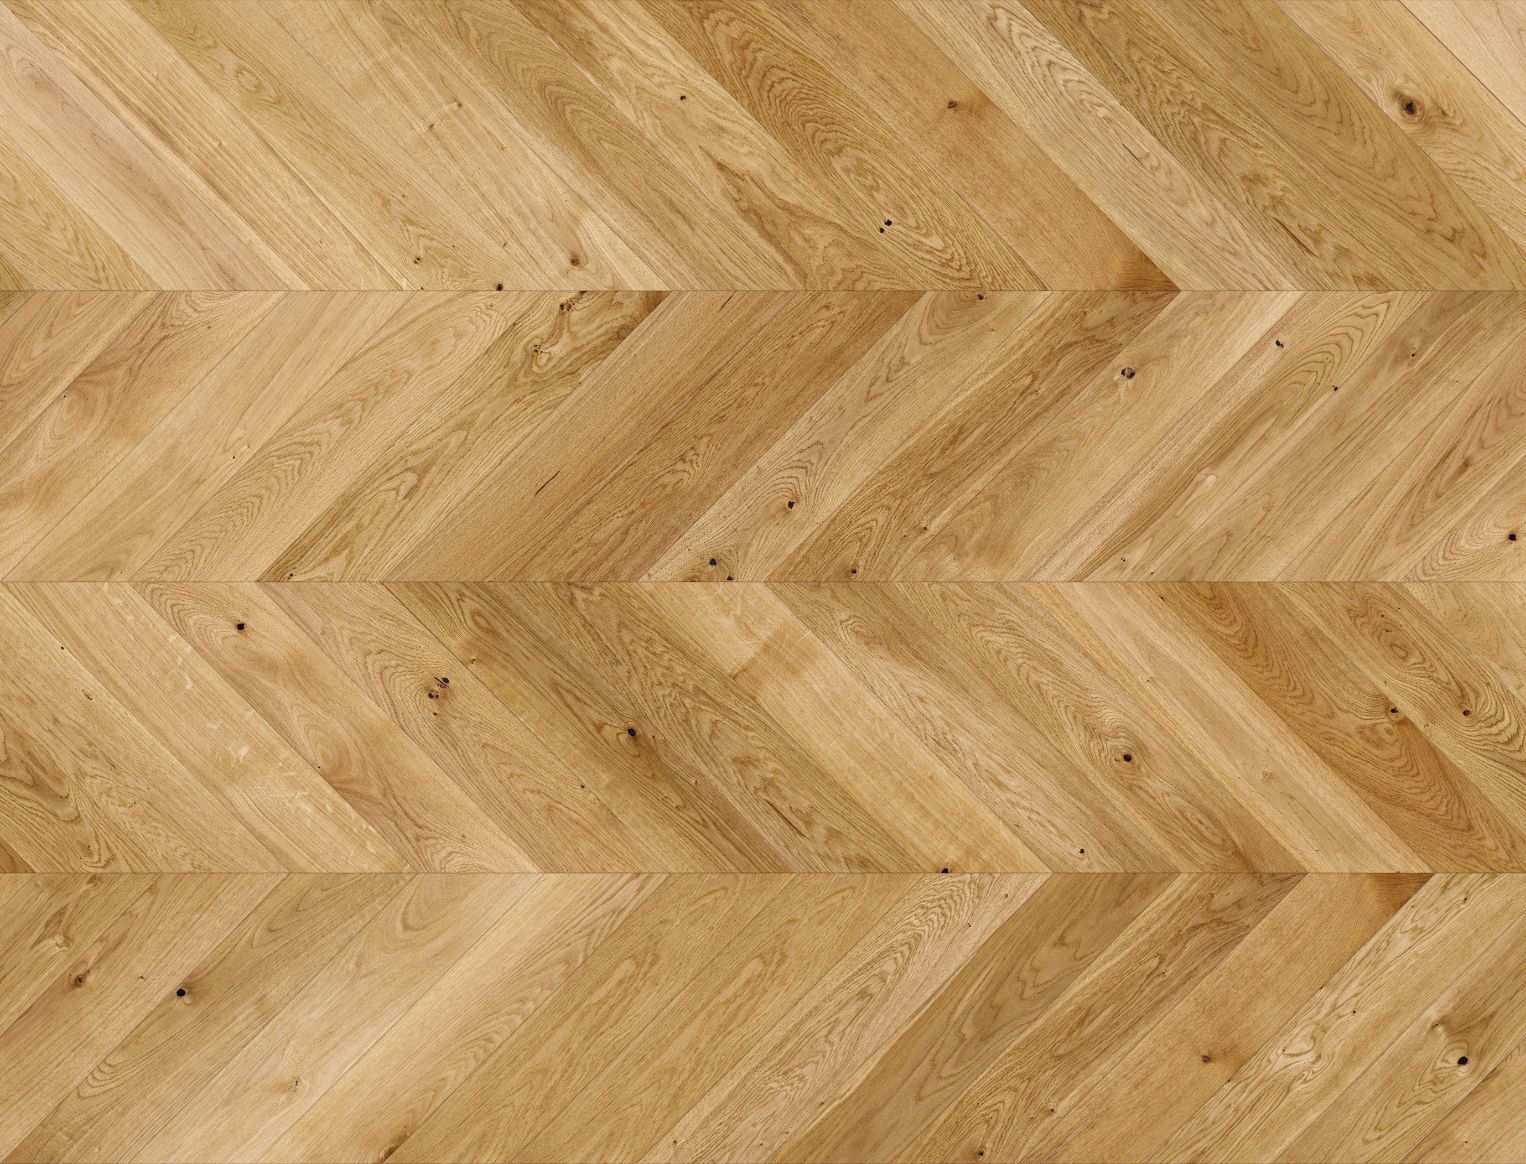 Natural wood flooring laid in chevron pattern